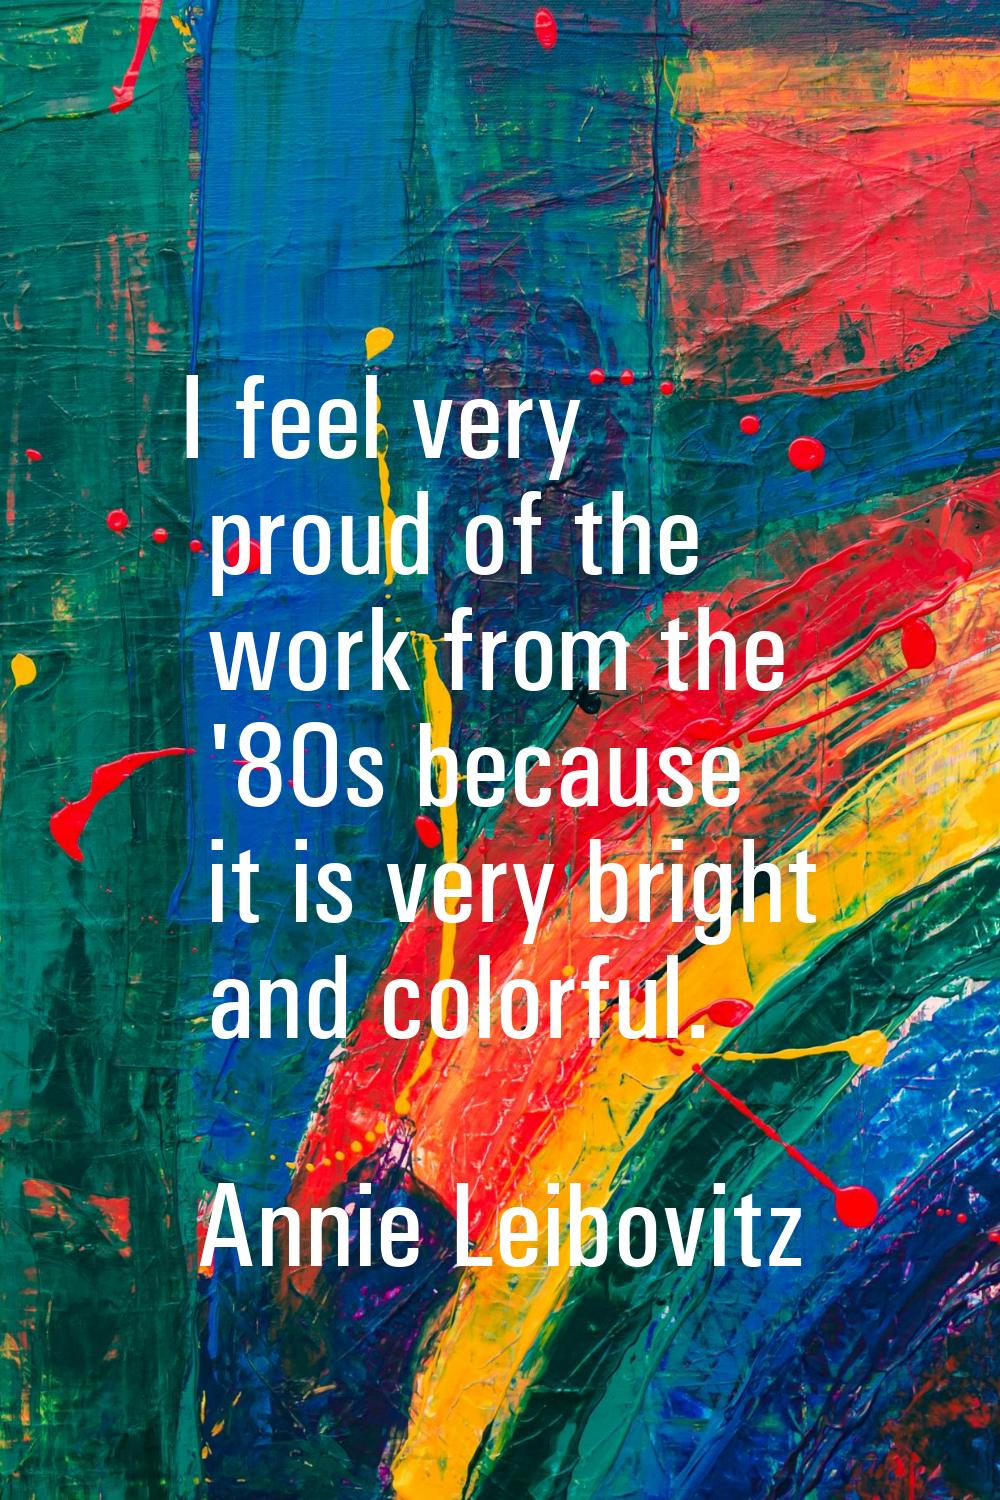 I feel very proud of the work from the '80s because it is very bright and colorful.